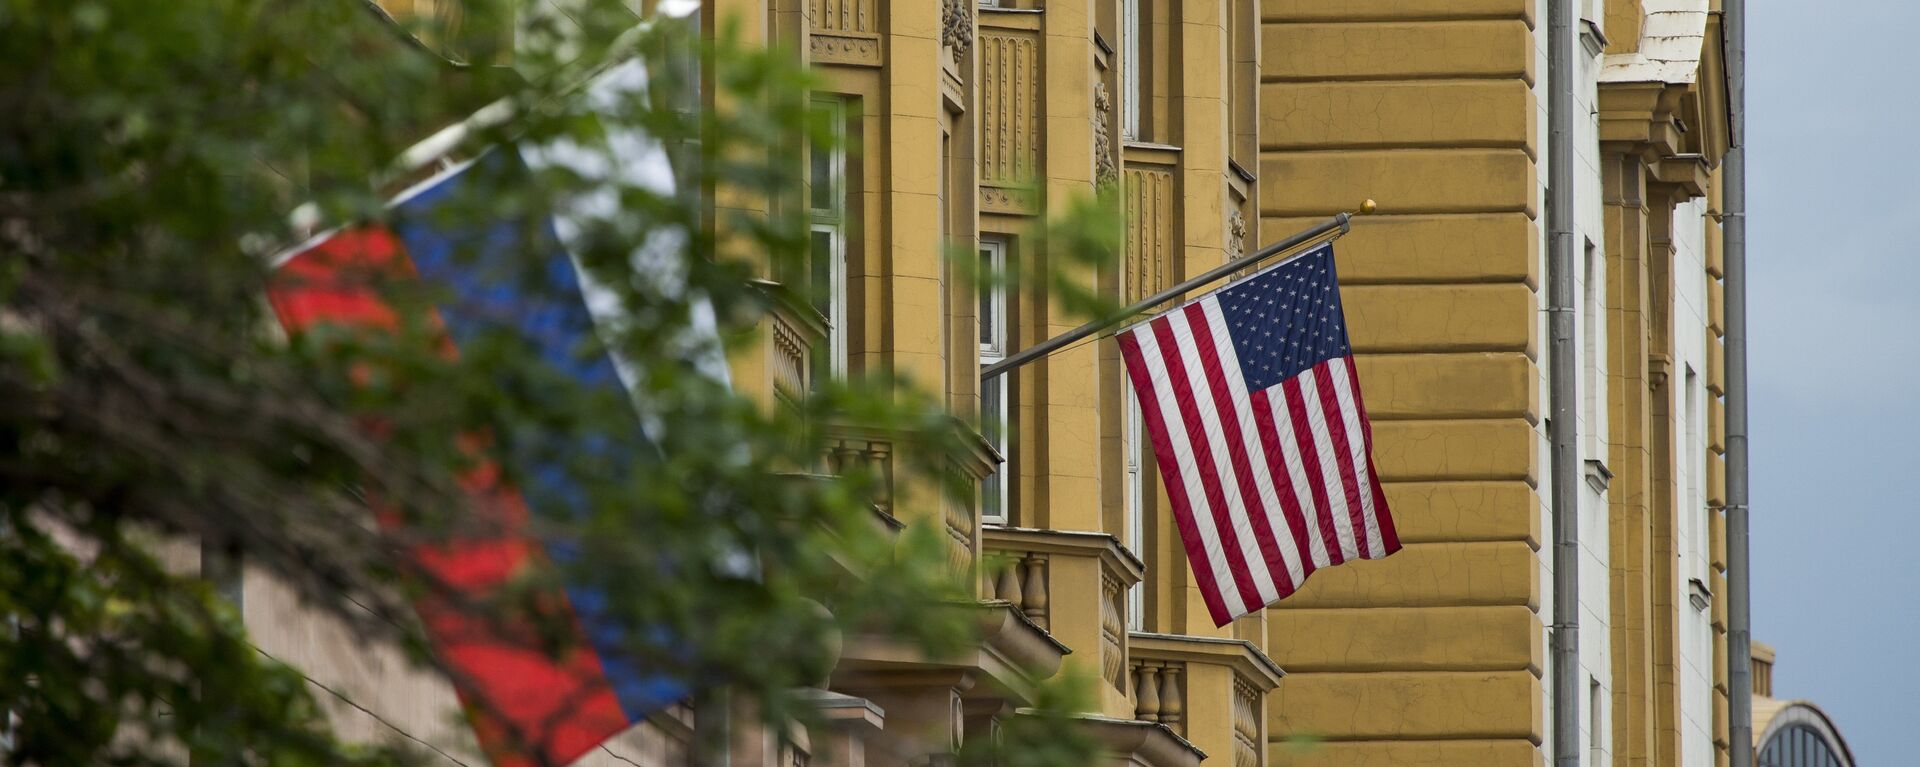 U.S. and Russian flags hung at the U.S. Embassy in Moscow, Russia, Friday, July 28, 2017 - Sputnik International, 1920, 20.04.2021